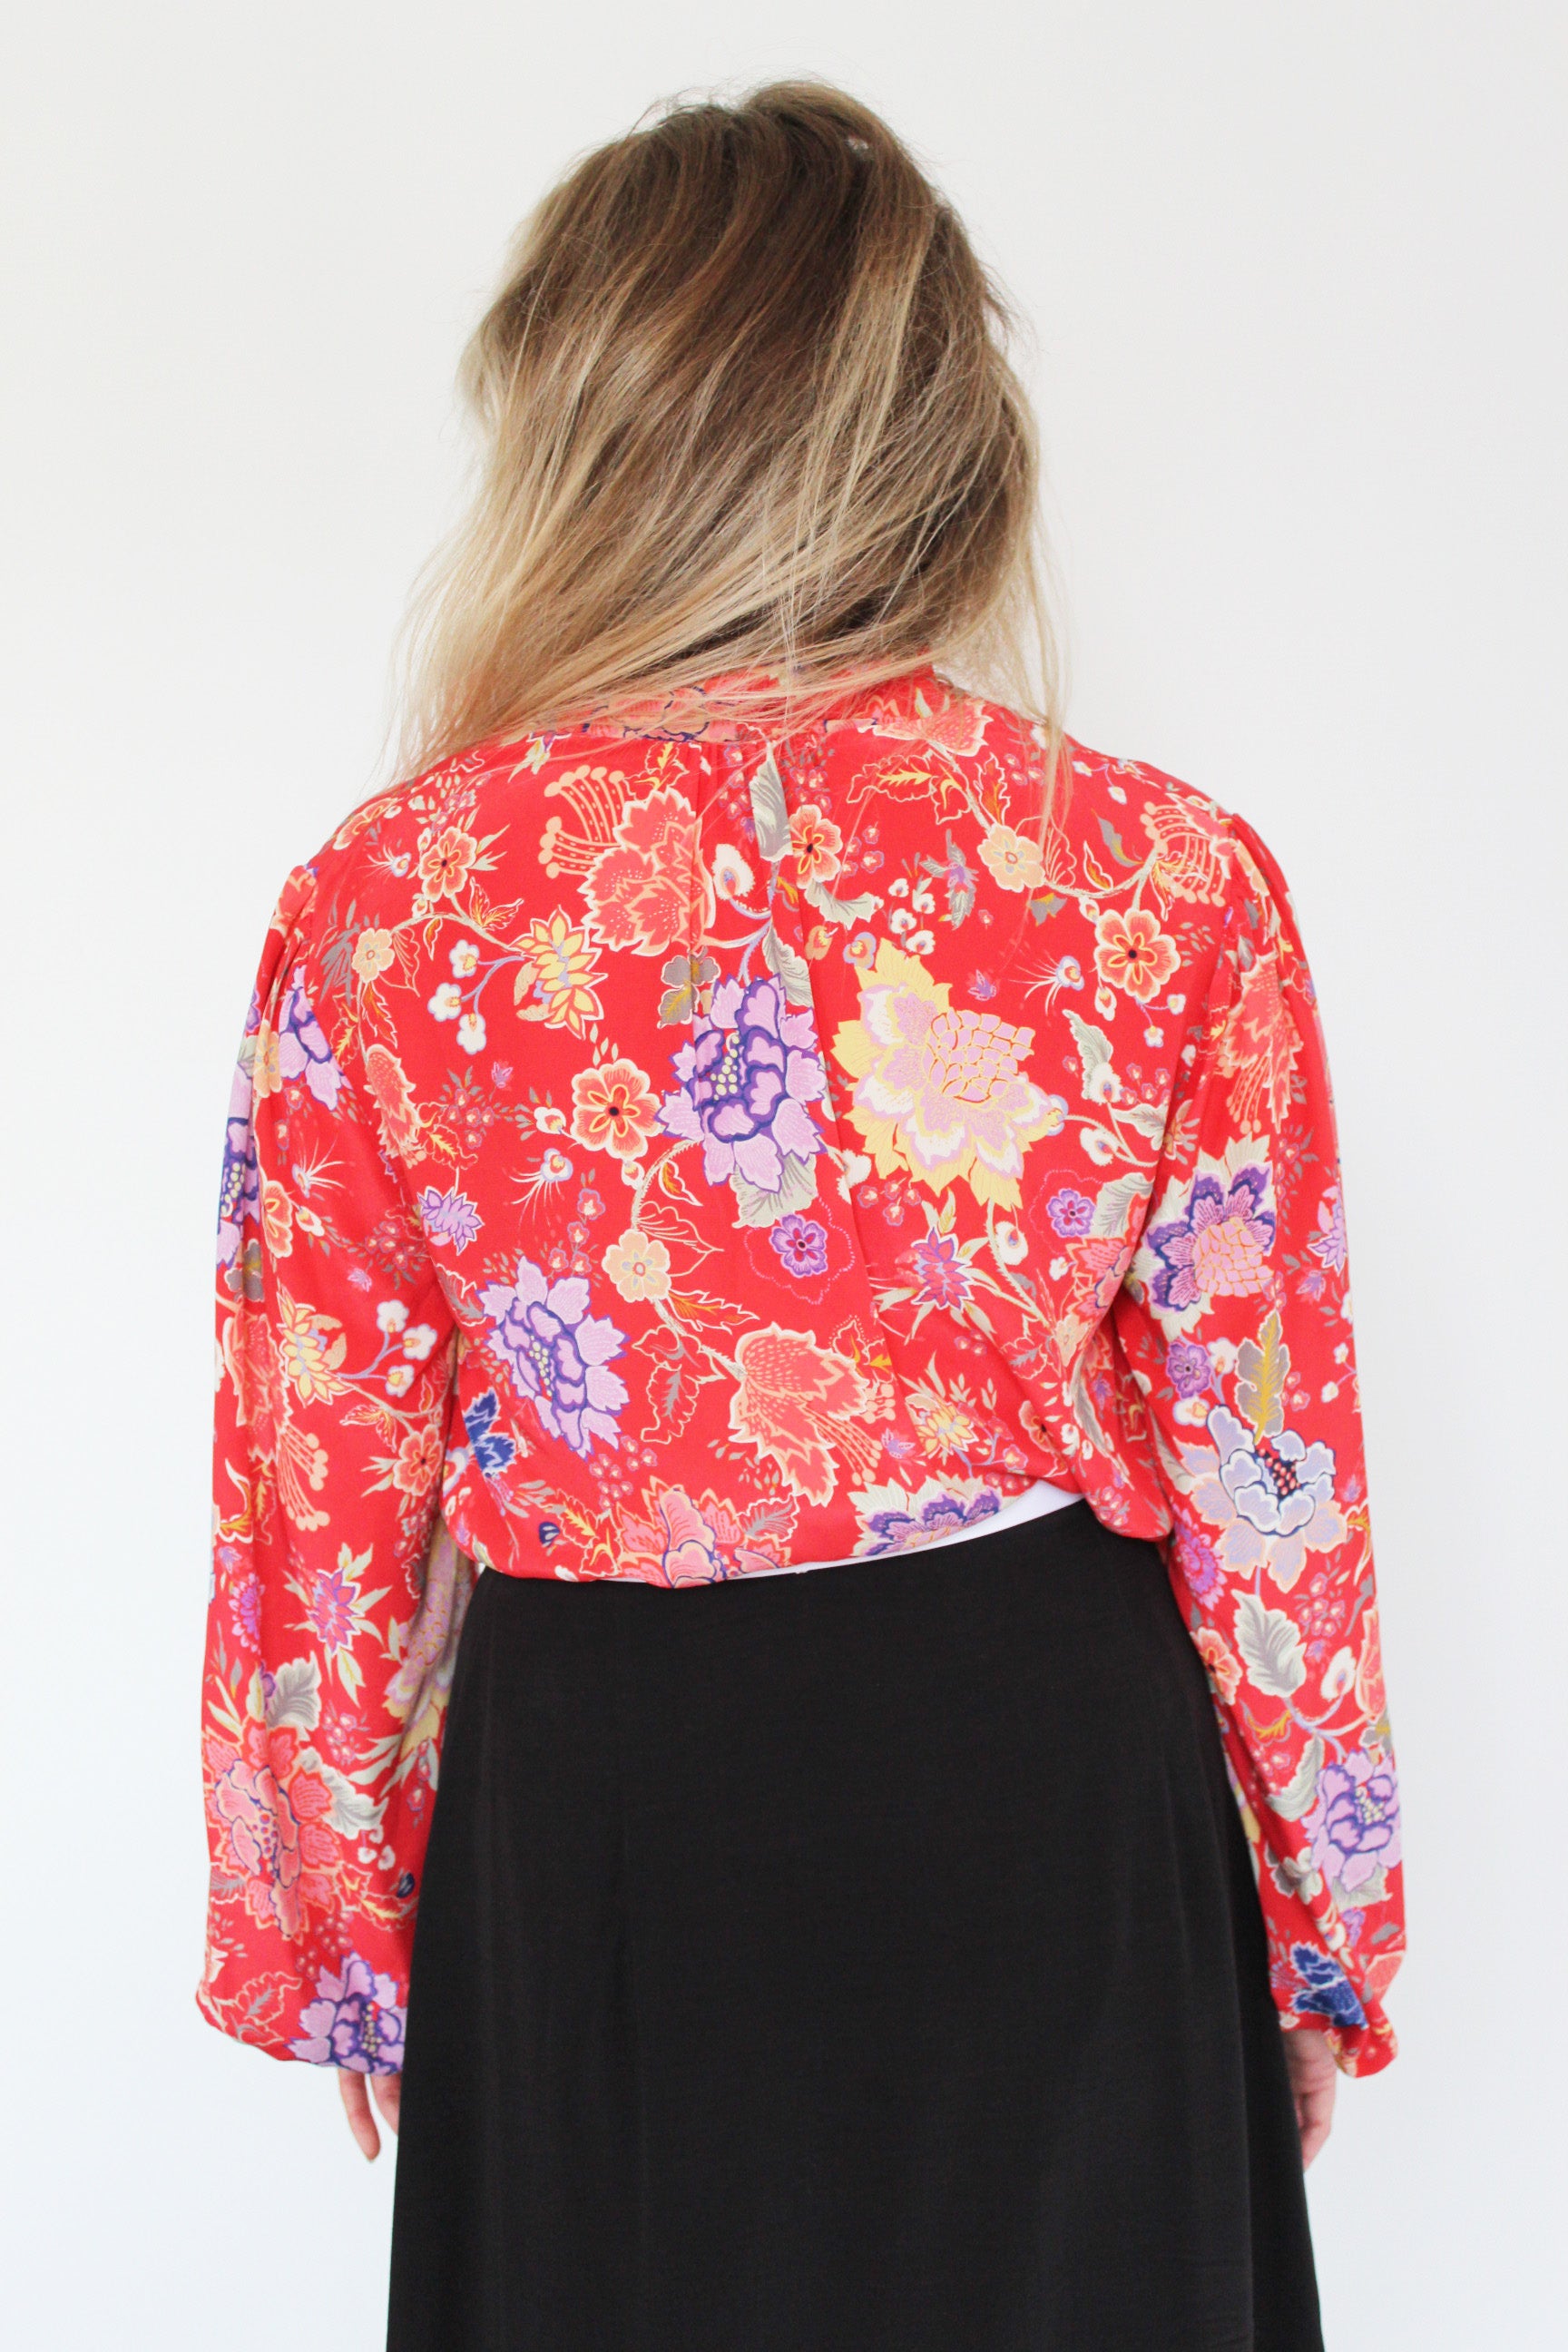 RIXO Moss Blouse in Peony Flora Red